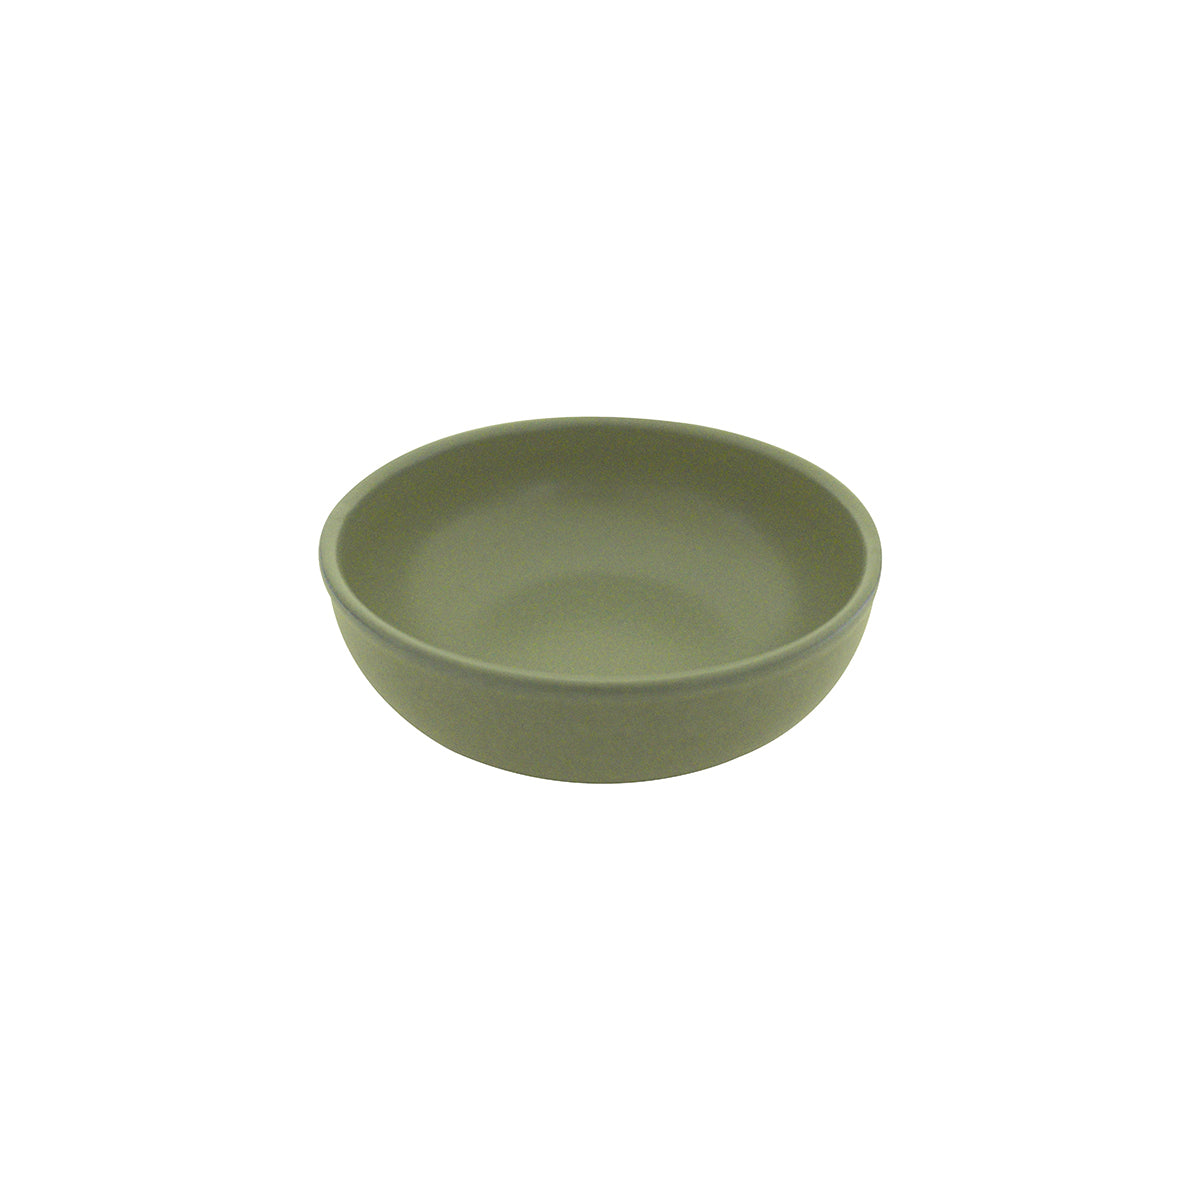 Round Bowl - 125mm, Green, Eclipse from Eclipse. made out of Ceramic and sold in boxes of 6. Hospitality quality at wholesale price with The Flying Fork! 